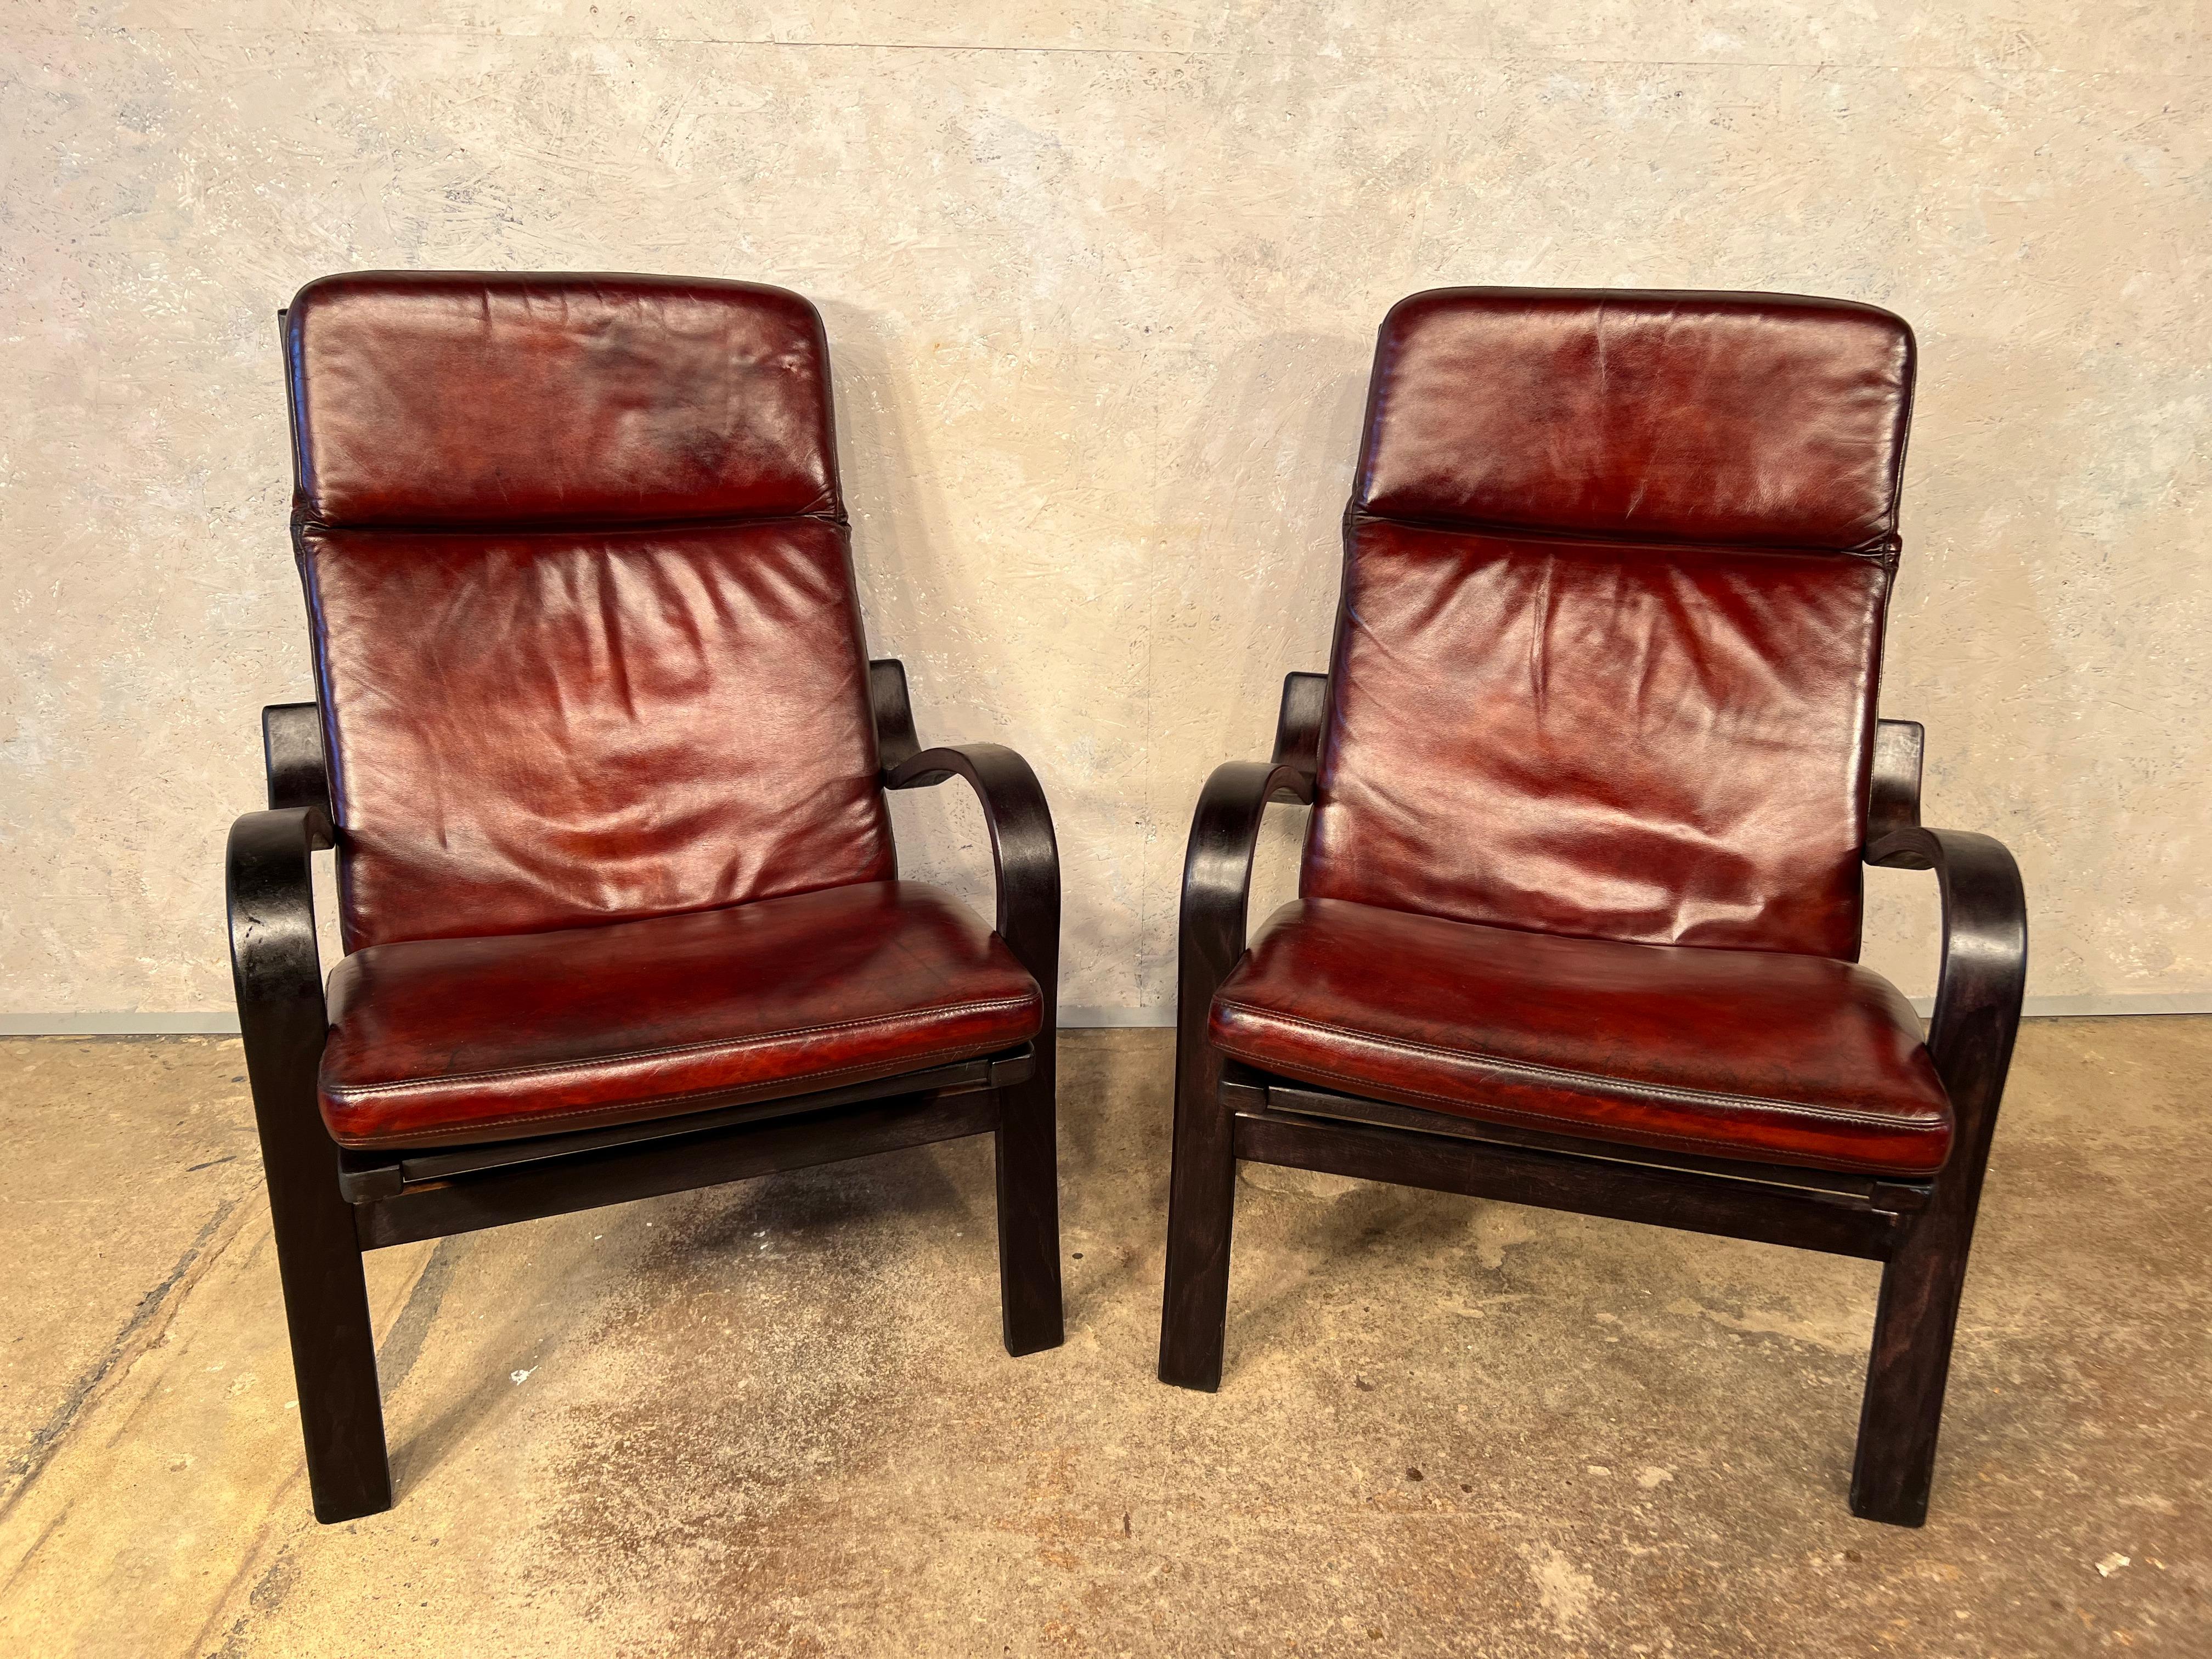 A stylish Pair of 70s Vintage Danish bentwood and leather chairs, a beautiful contrast between the ebonised bentwood frame and the deep chestnut hand dyed leather cushions, very sleek design, great patina and finish. In great vintage condition,